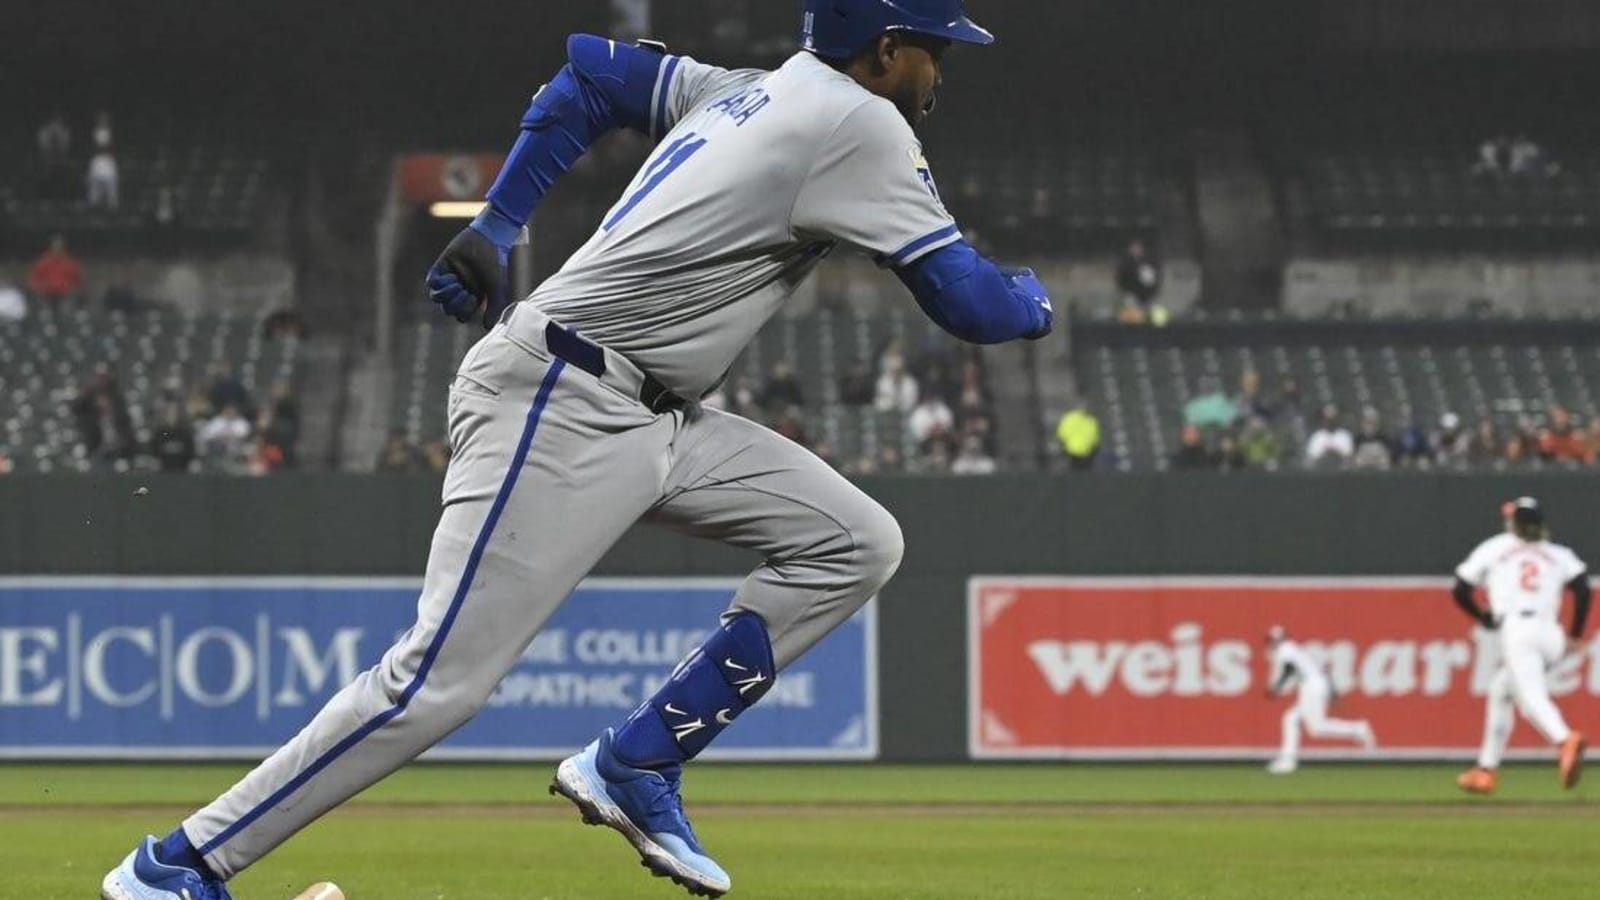 Royals attempt to keep power on against White Sox